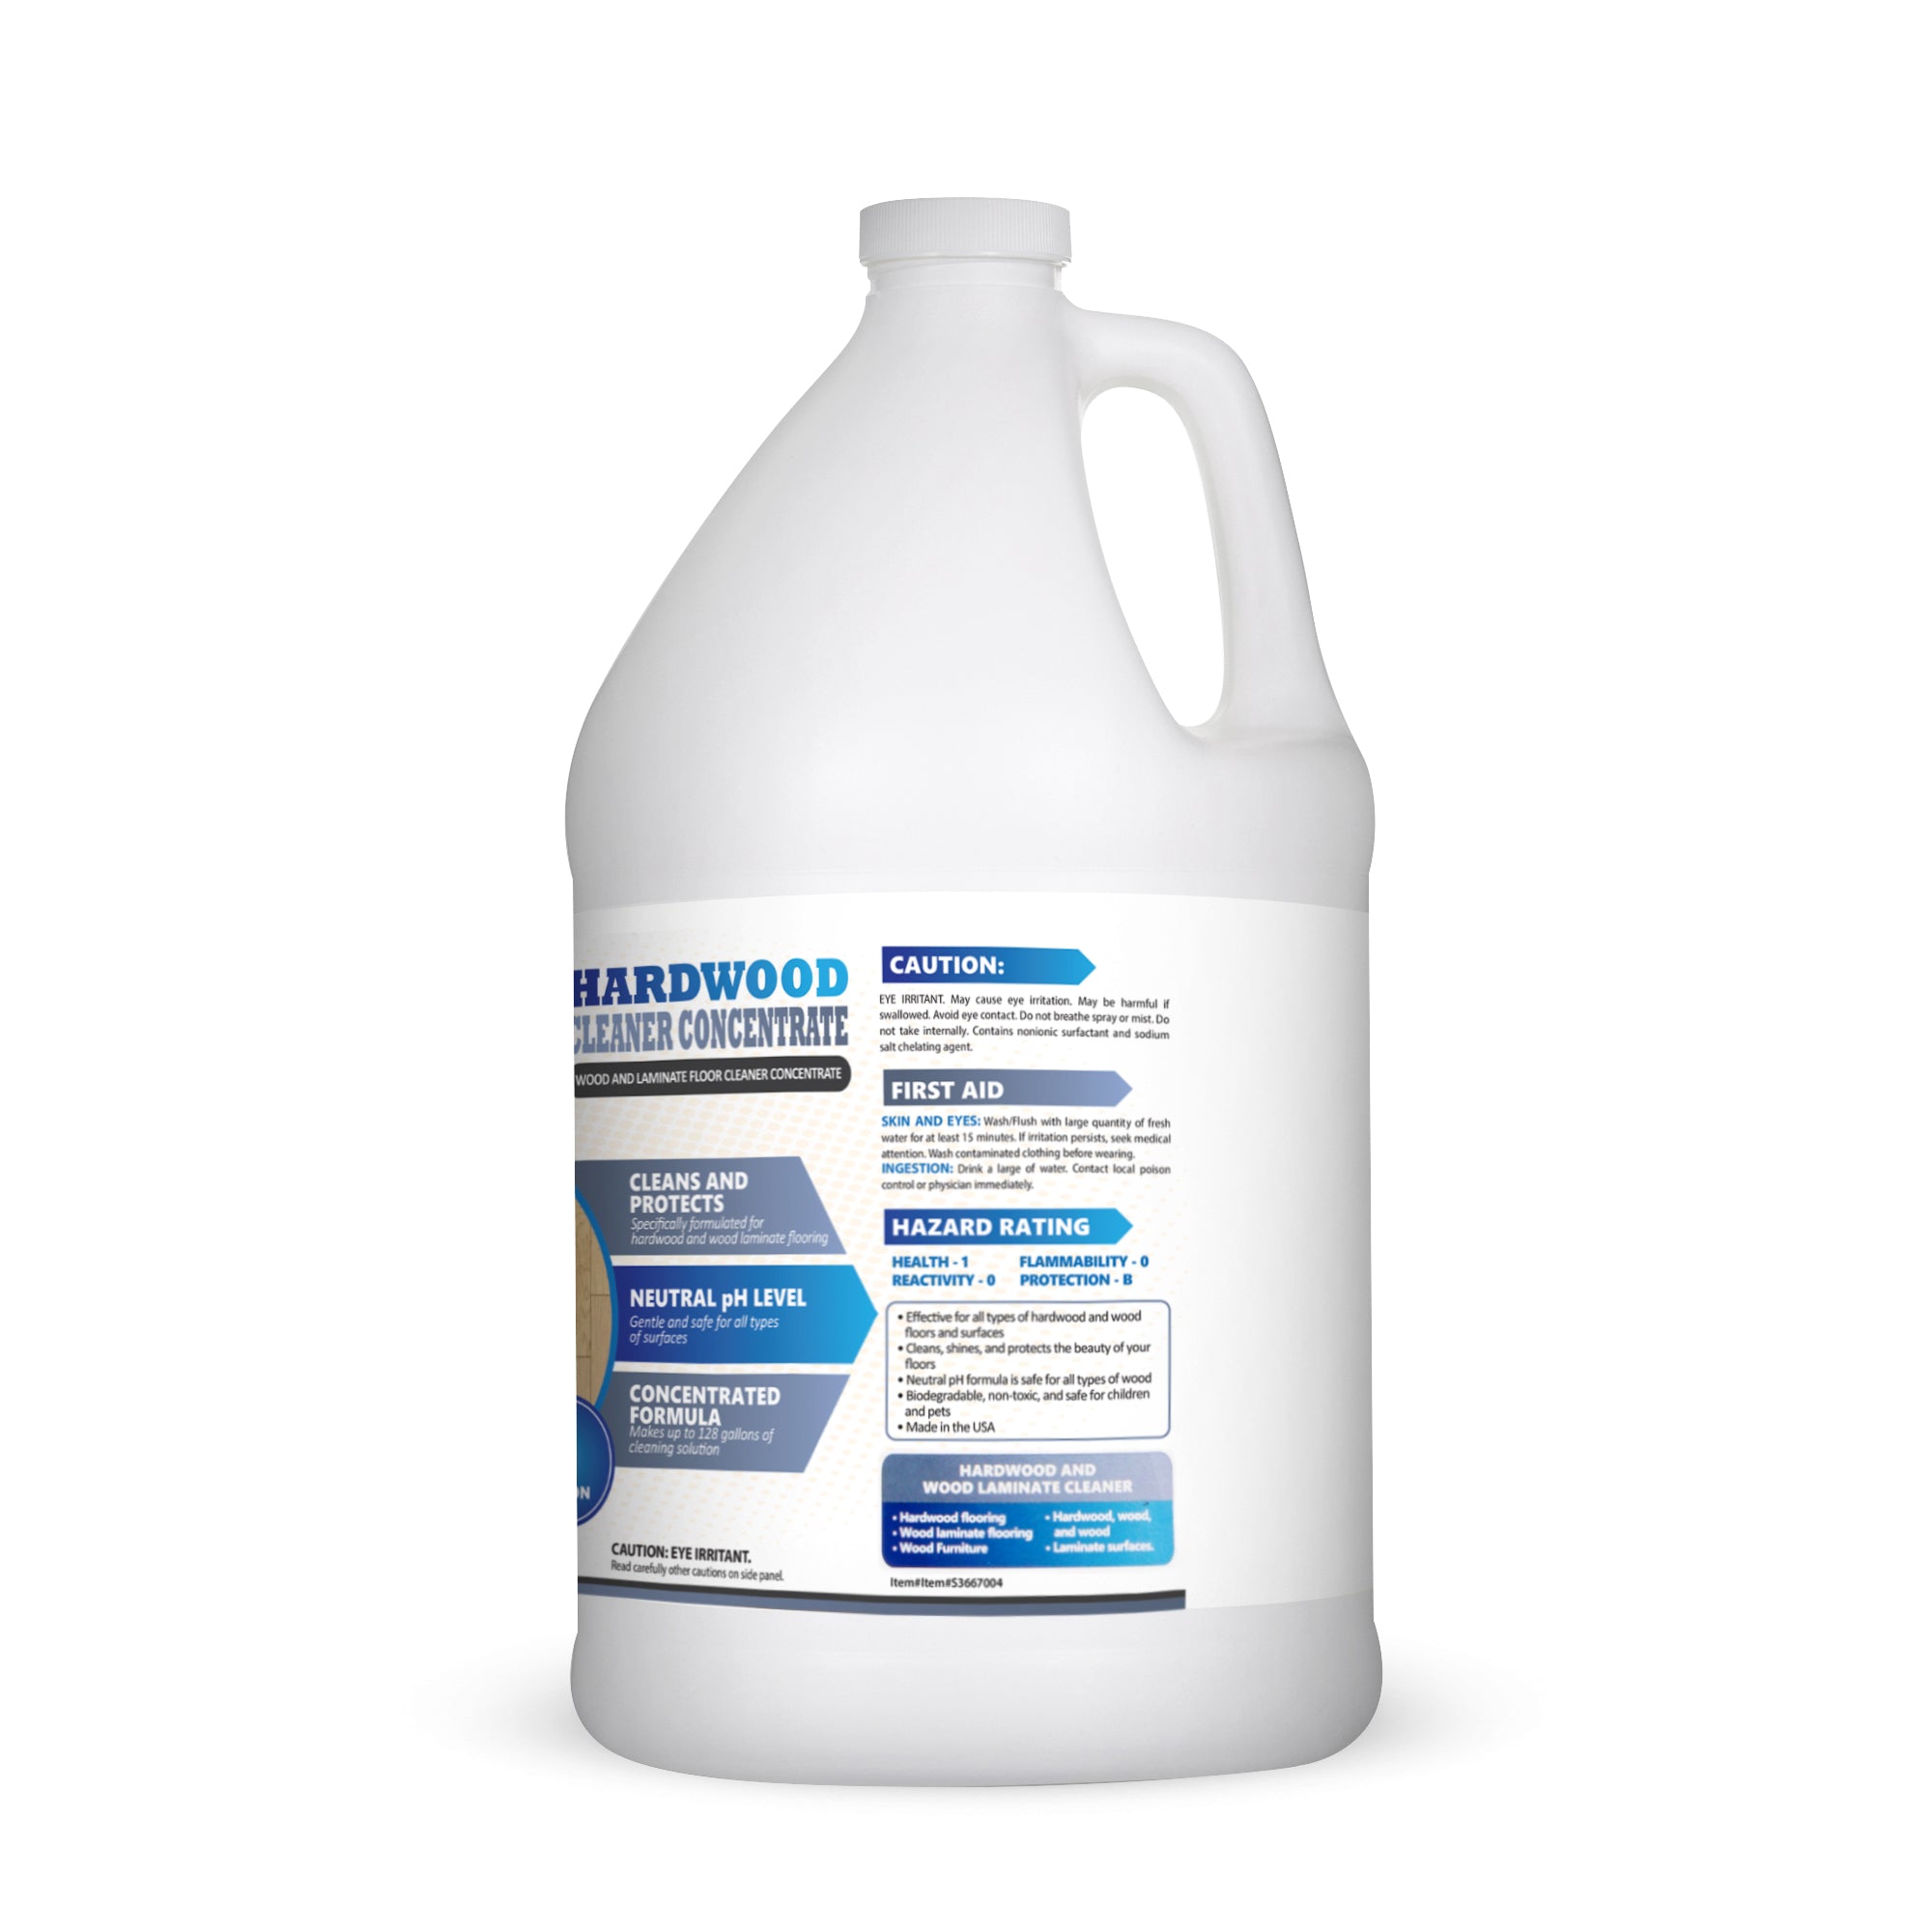 Sheiner's Hardwood and Laminate Floor Cleaner, 1 Gallon for Cleaning Wood, Natural, and Engineered Flooring, PH Neutral Formula